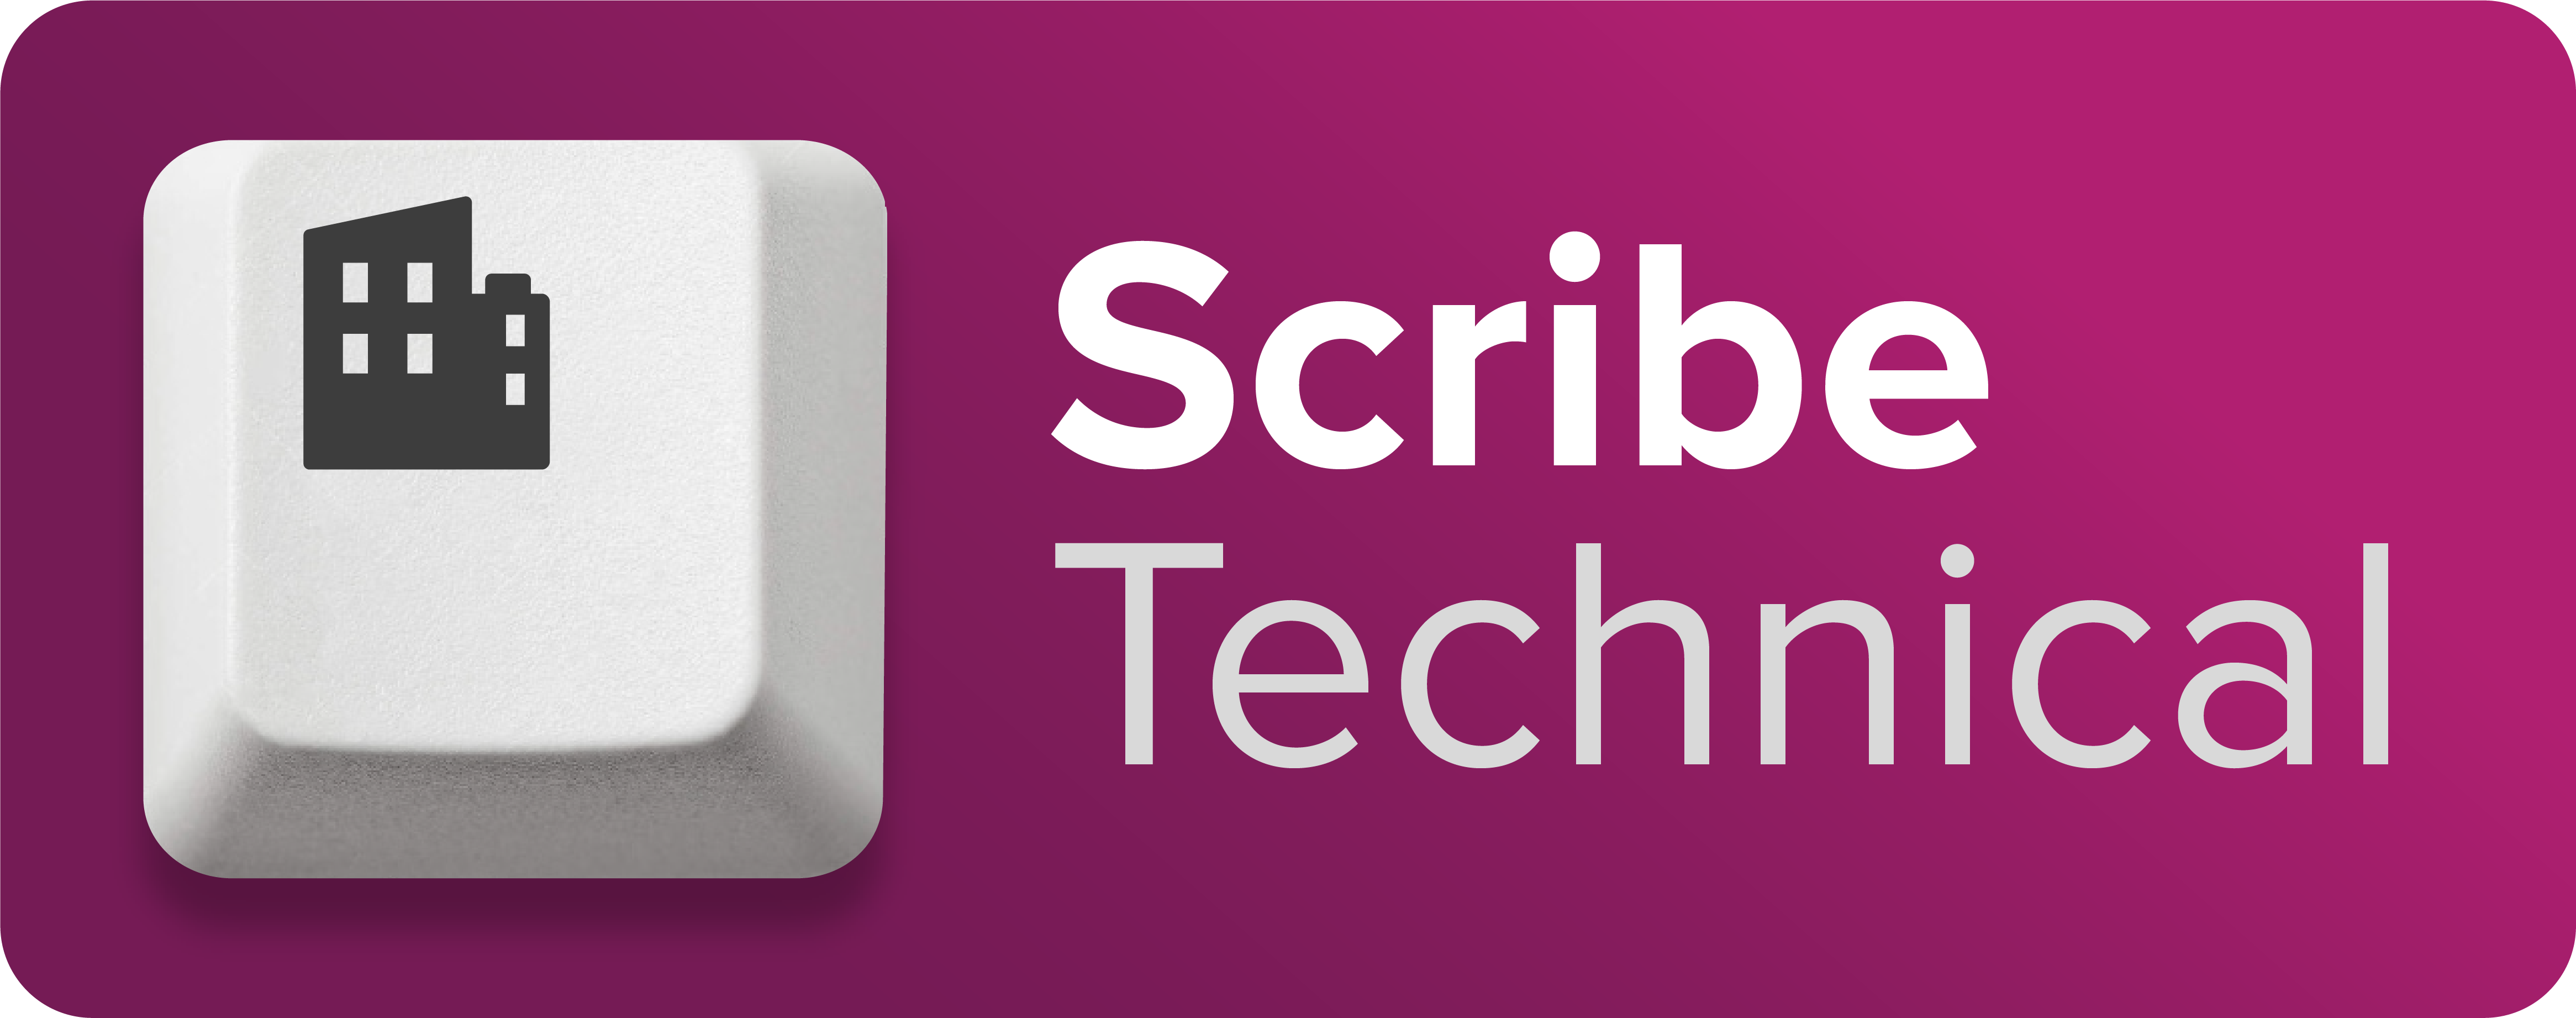 Scribe Technical